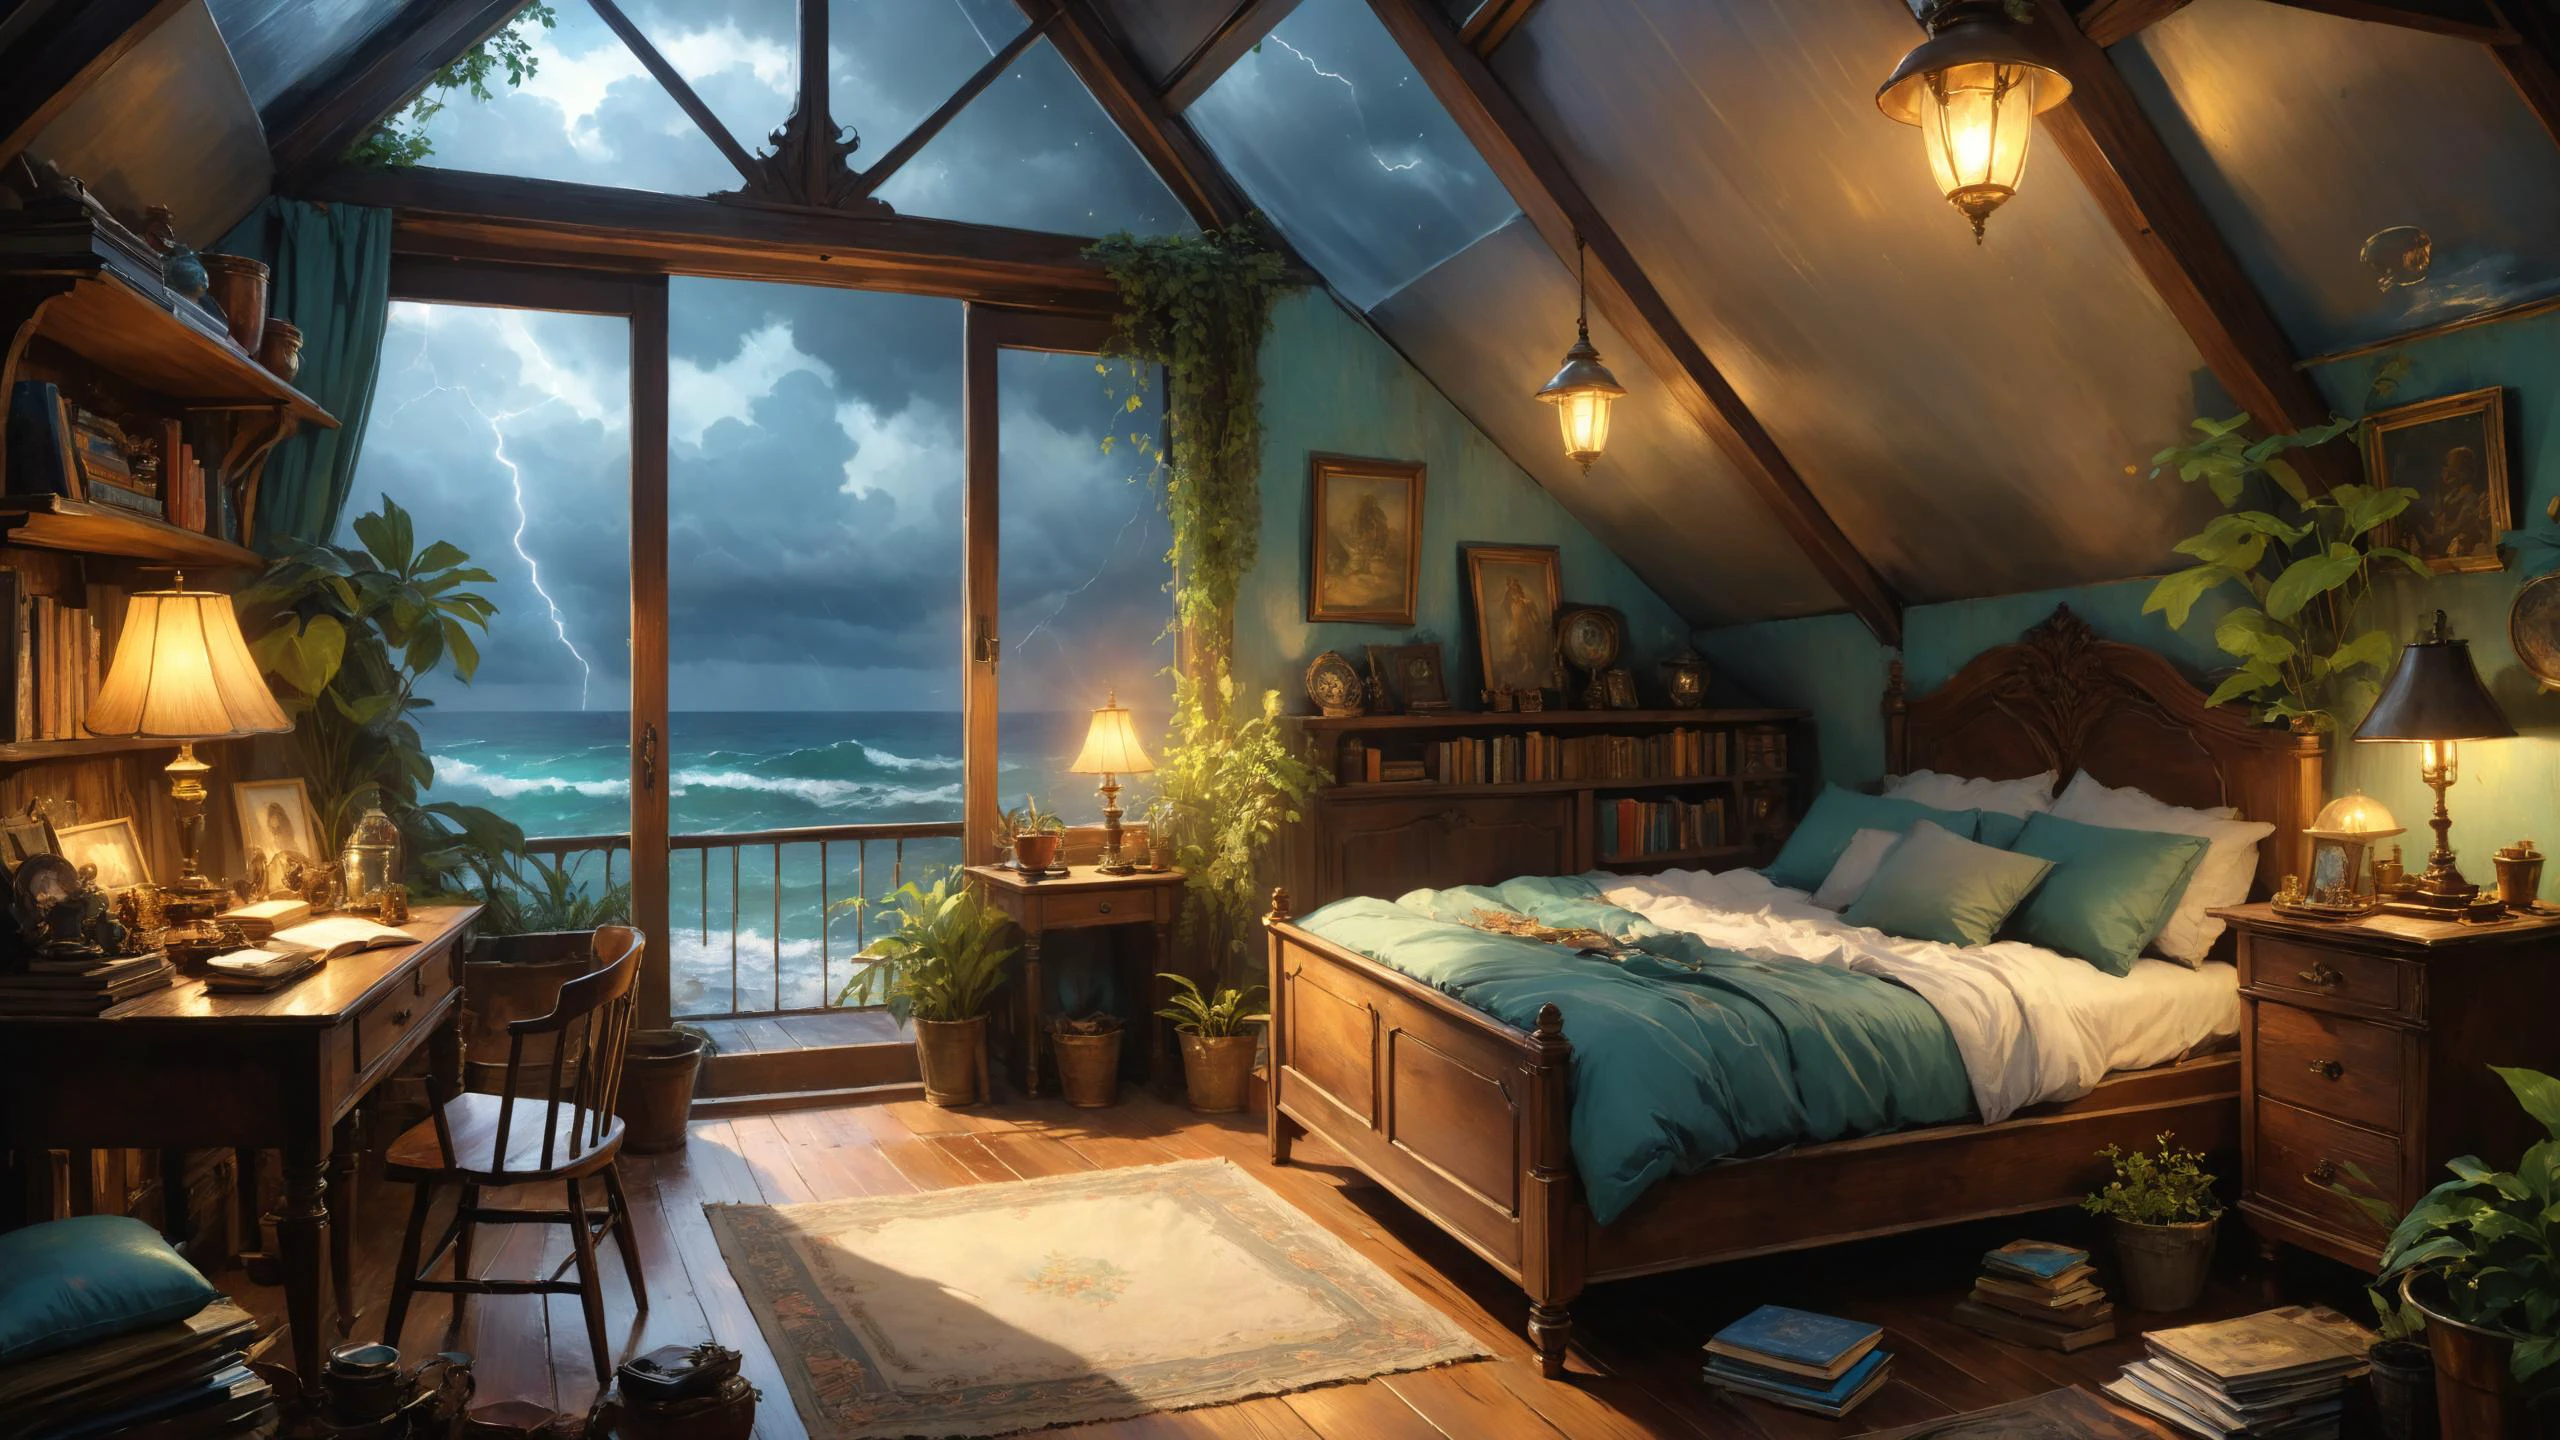 Attic retreat with vintage furnishings, Dreamyvibes Artstyle,, Storm Lighting, fracolor, sharp focus, art by Artgerm and Donato Giancola and Joseph Christian Leyendecker, Ross Tran, WLOP 